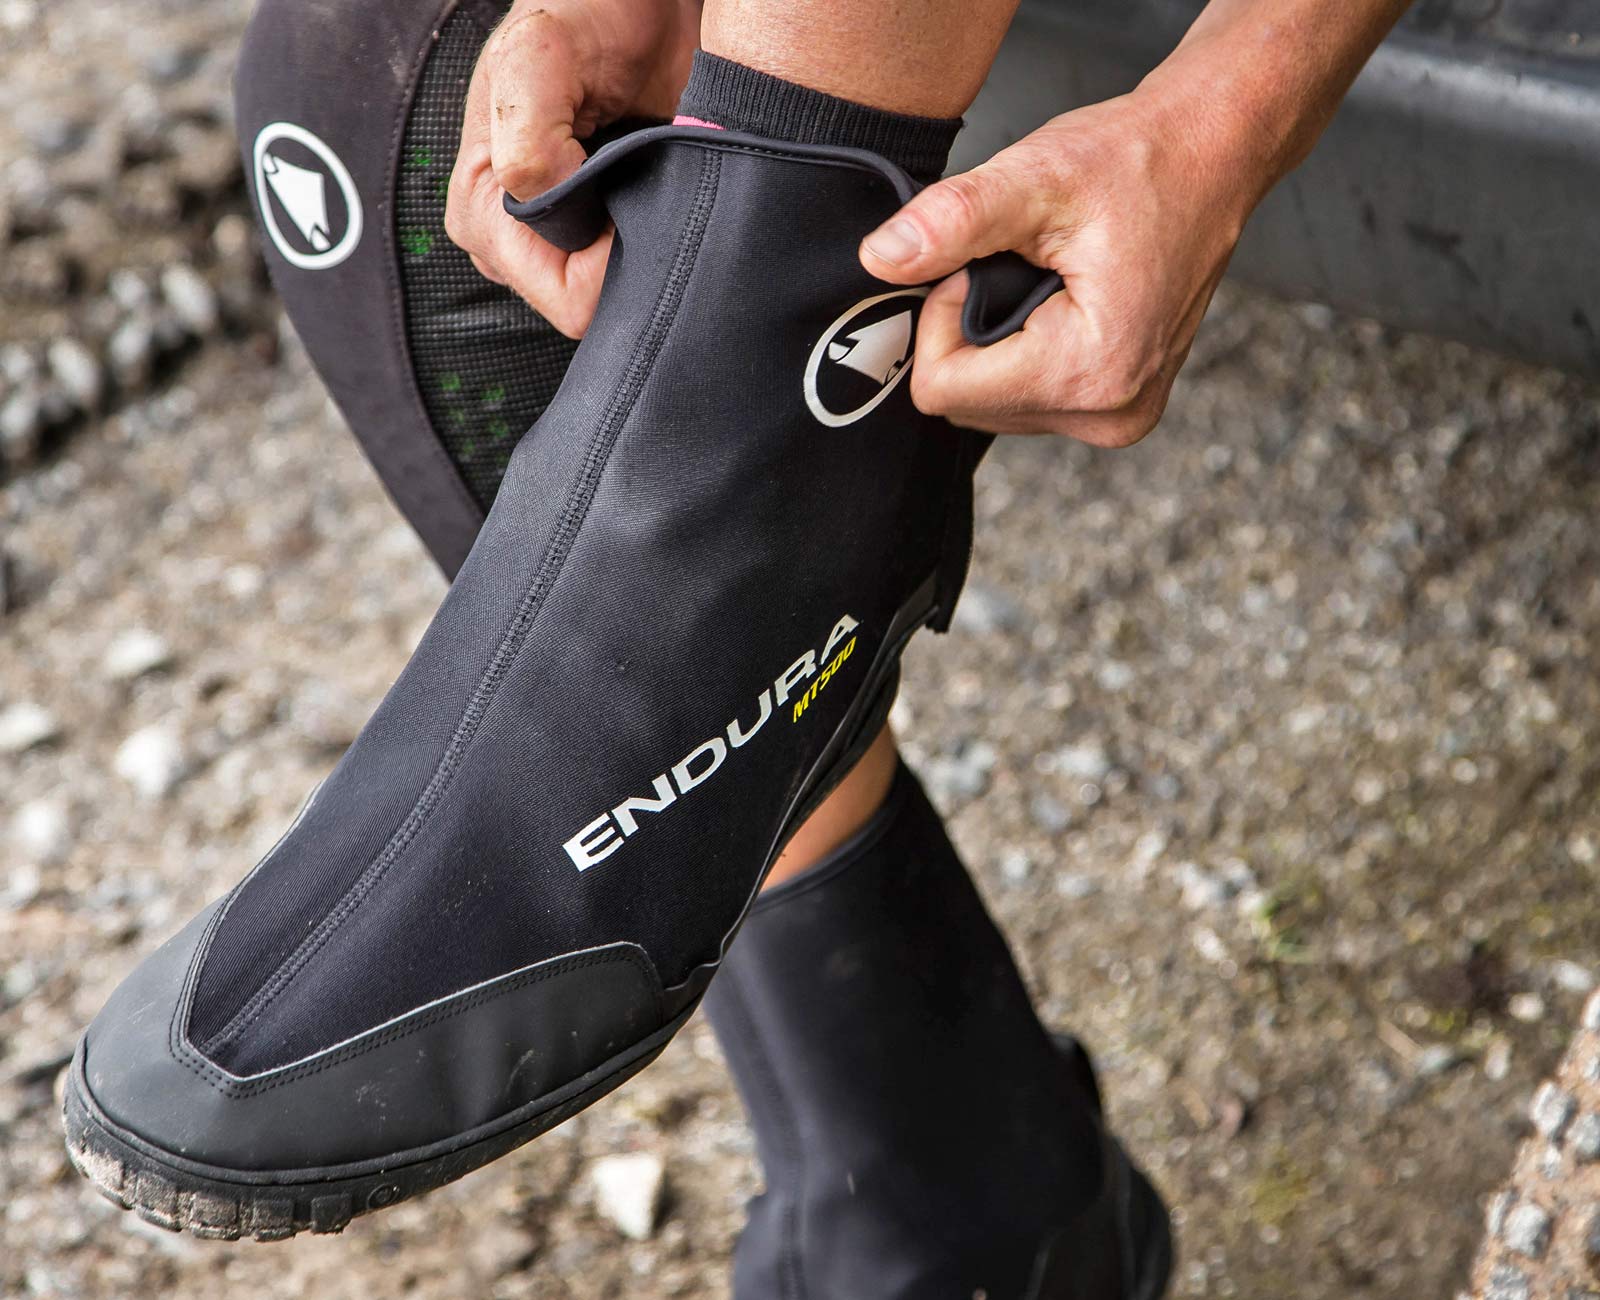 Endura MT500 Plus Overshoe flat pedal platform pedal trail mountain bike overshoes winter shoe covers easy on and off